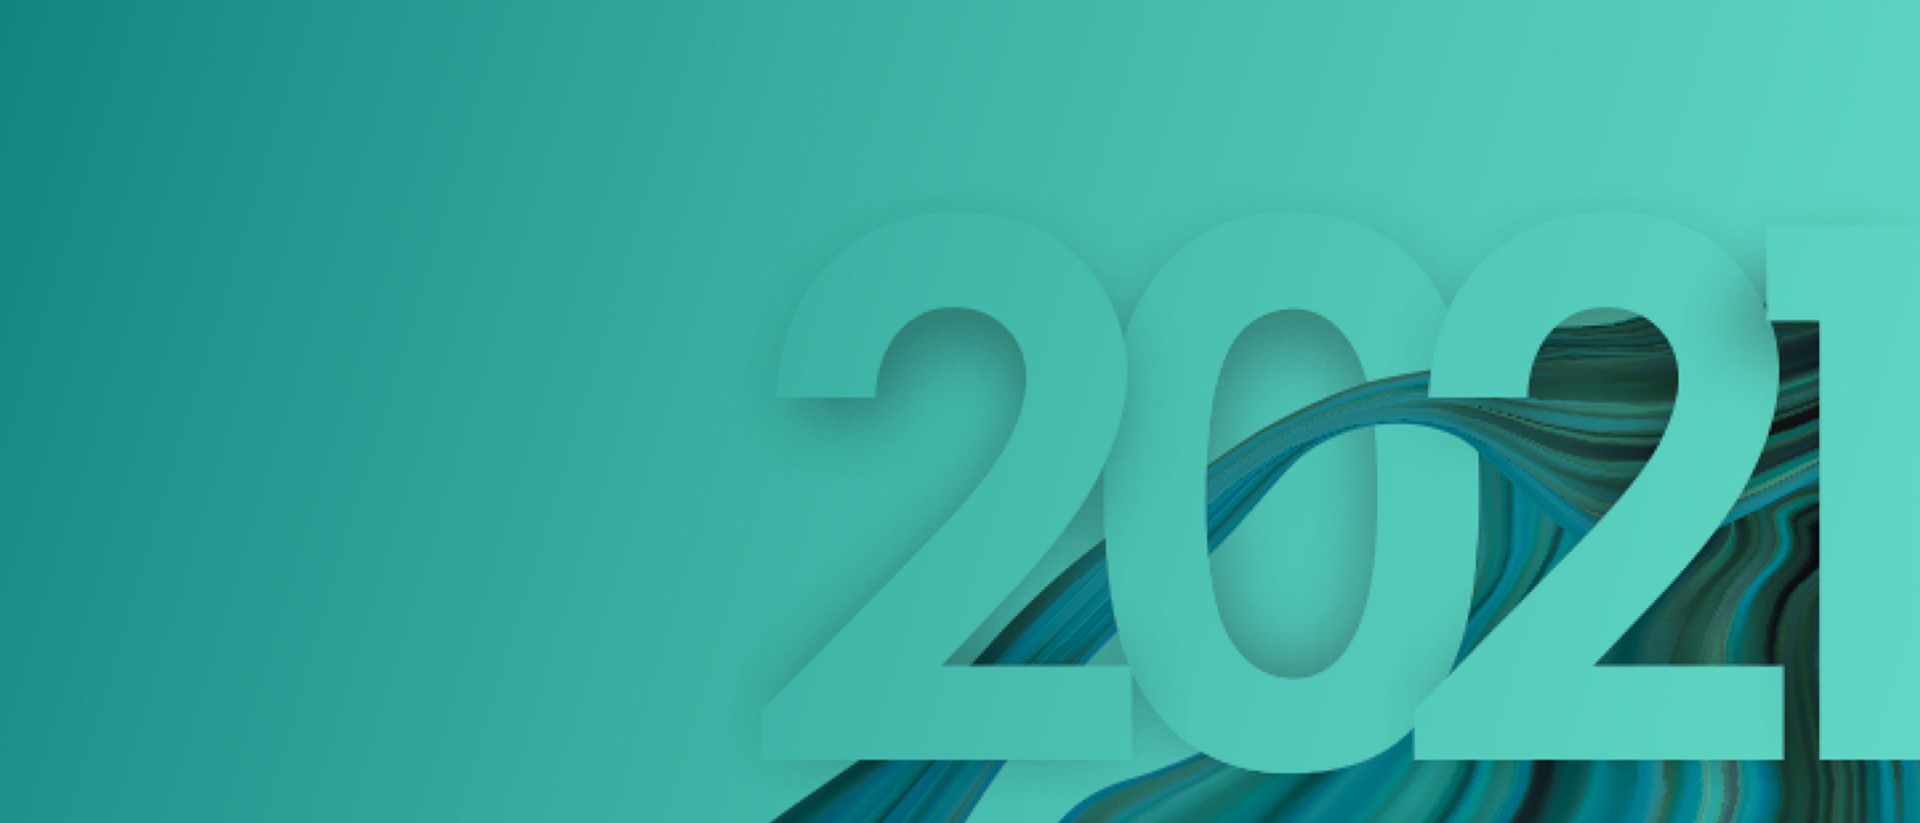 Image for the 2021 Webinar series in teal